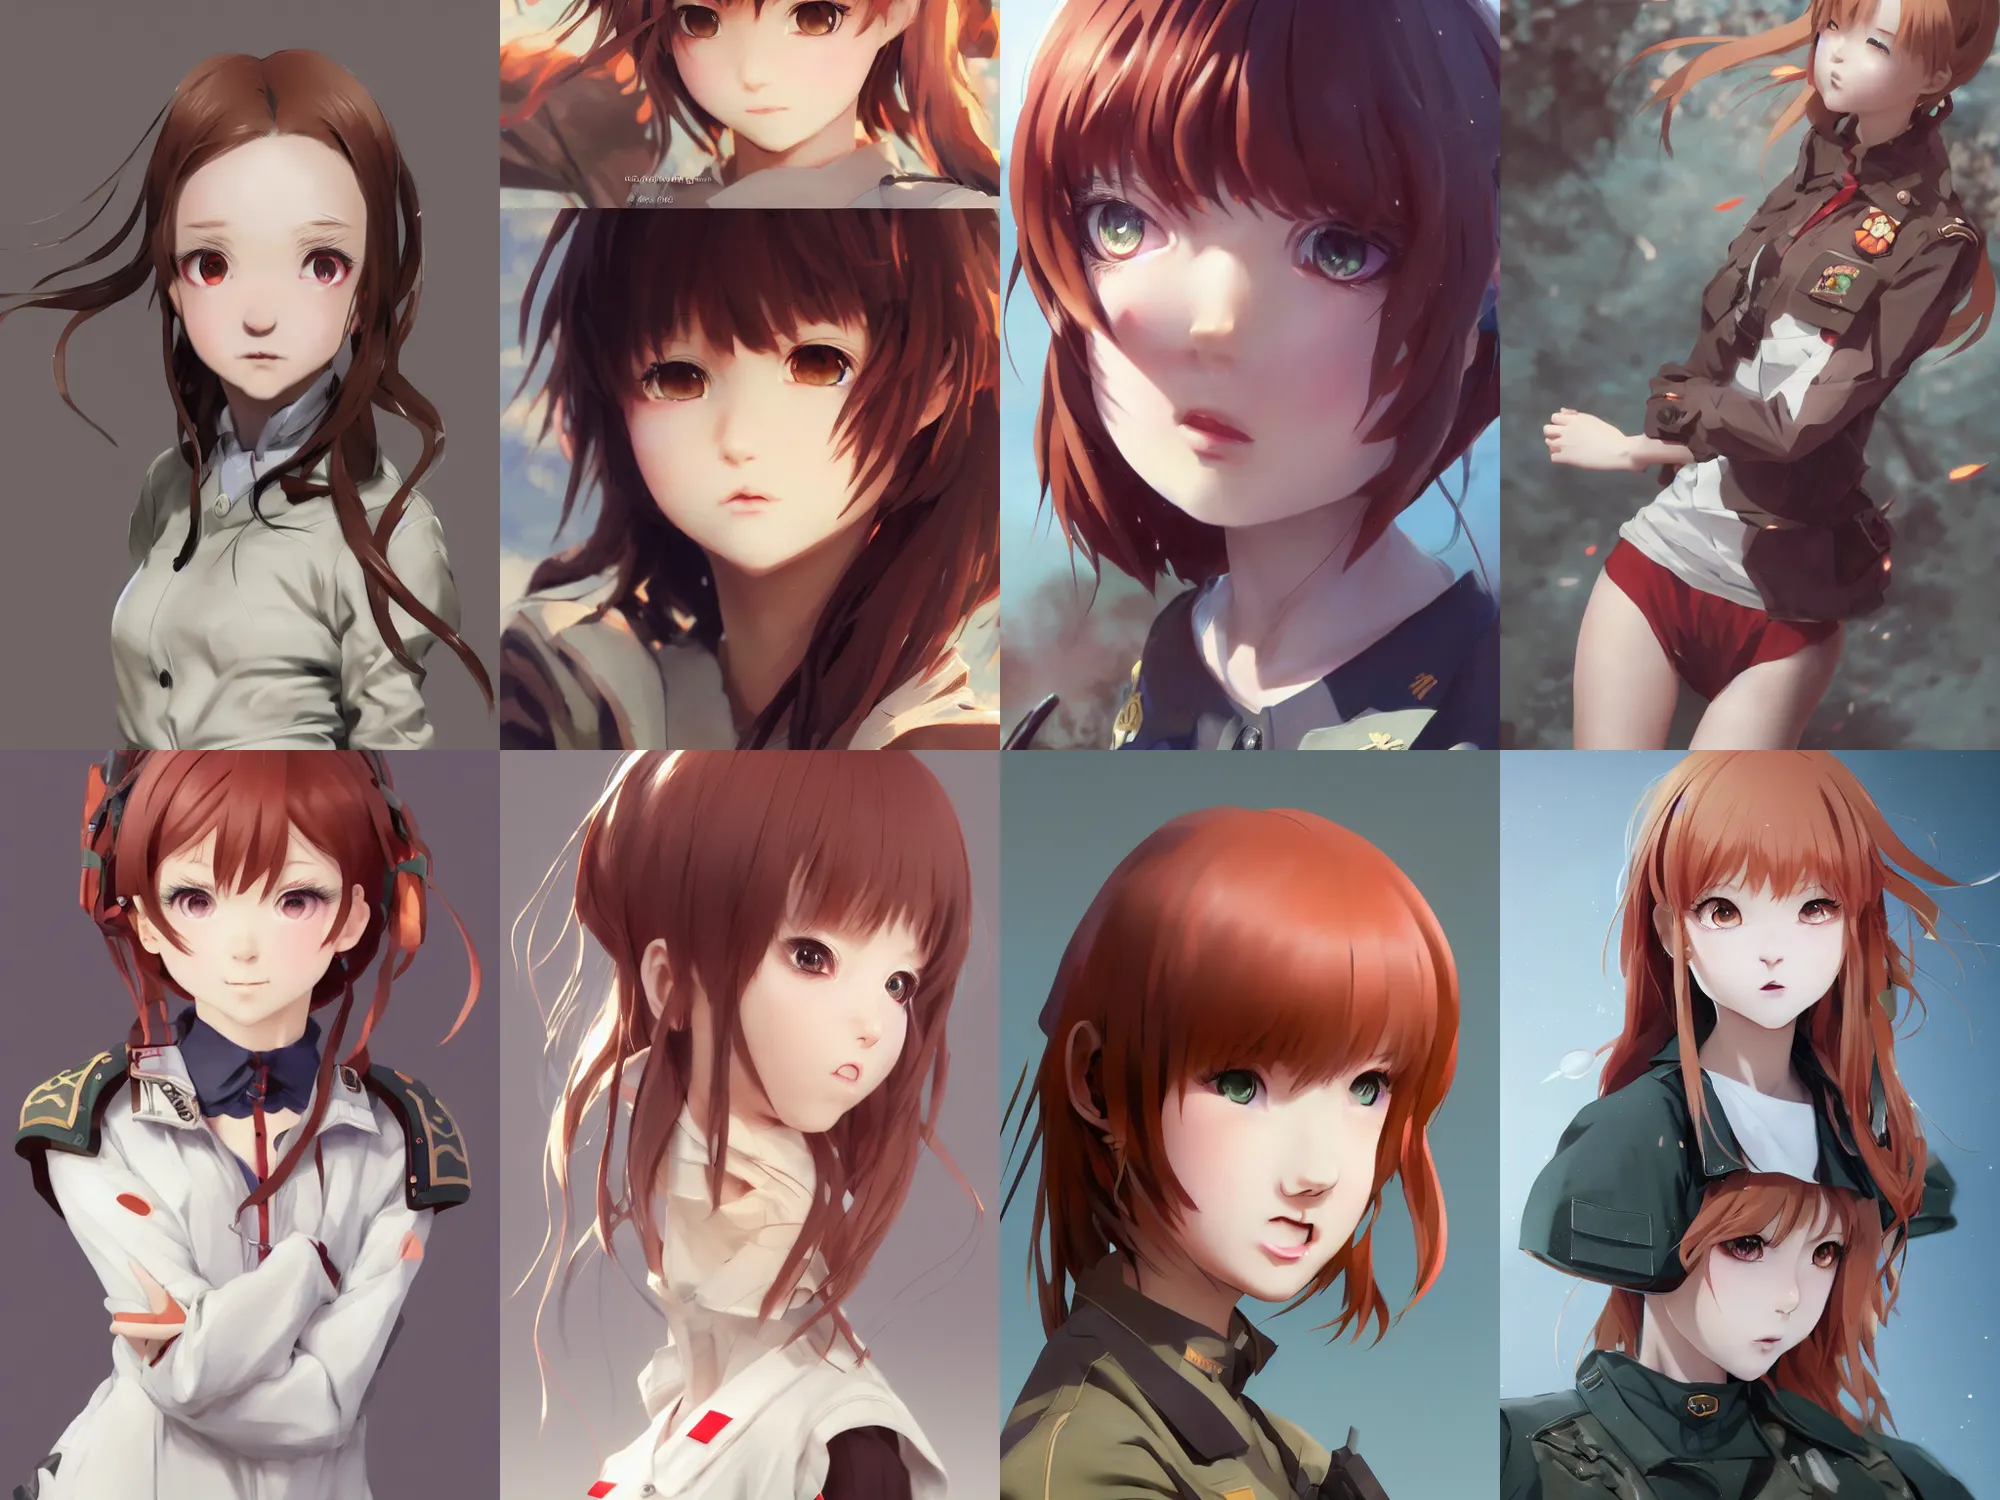 Prompt: Very complicated dynamic composition, realistic anime style at Pixiv CGSociety by WLOP, ilya kuvshinov, krenz cushart, Greg Rutkowski, trending on artstation. Zbrush sculpt colored, Octane render in Maya and Houdini VFX, close-up portrait of young redhead girl in motion, cute, innocent, she expressing joy, wearing military uniform, silky hair, stunning deep eyes. In cityscape. Very expressive and inspirational. Amazing textured brush strokes. Cinematic dramatic atmosphere, soft volumetric studio lighting.